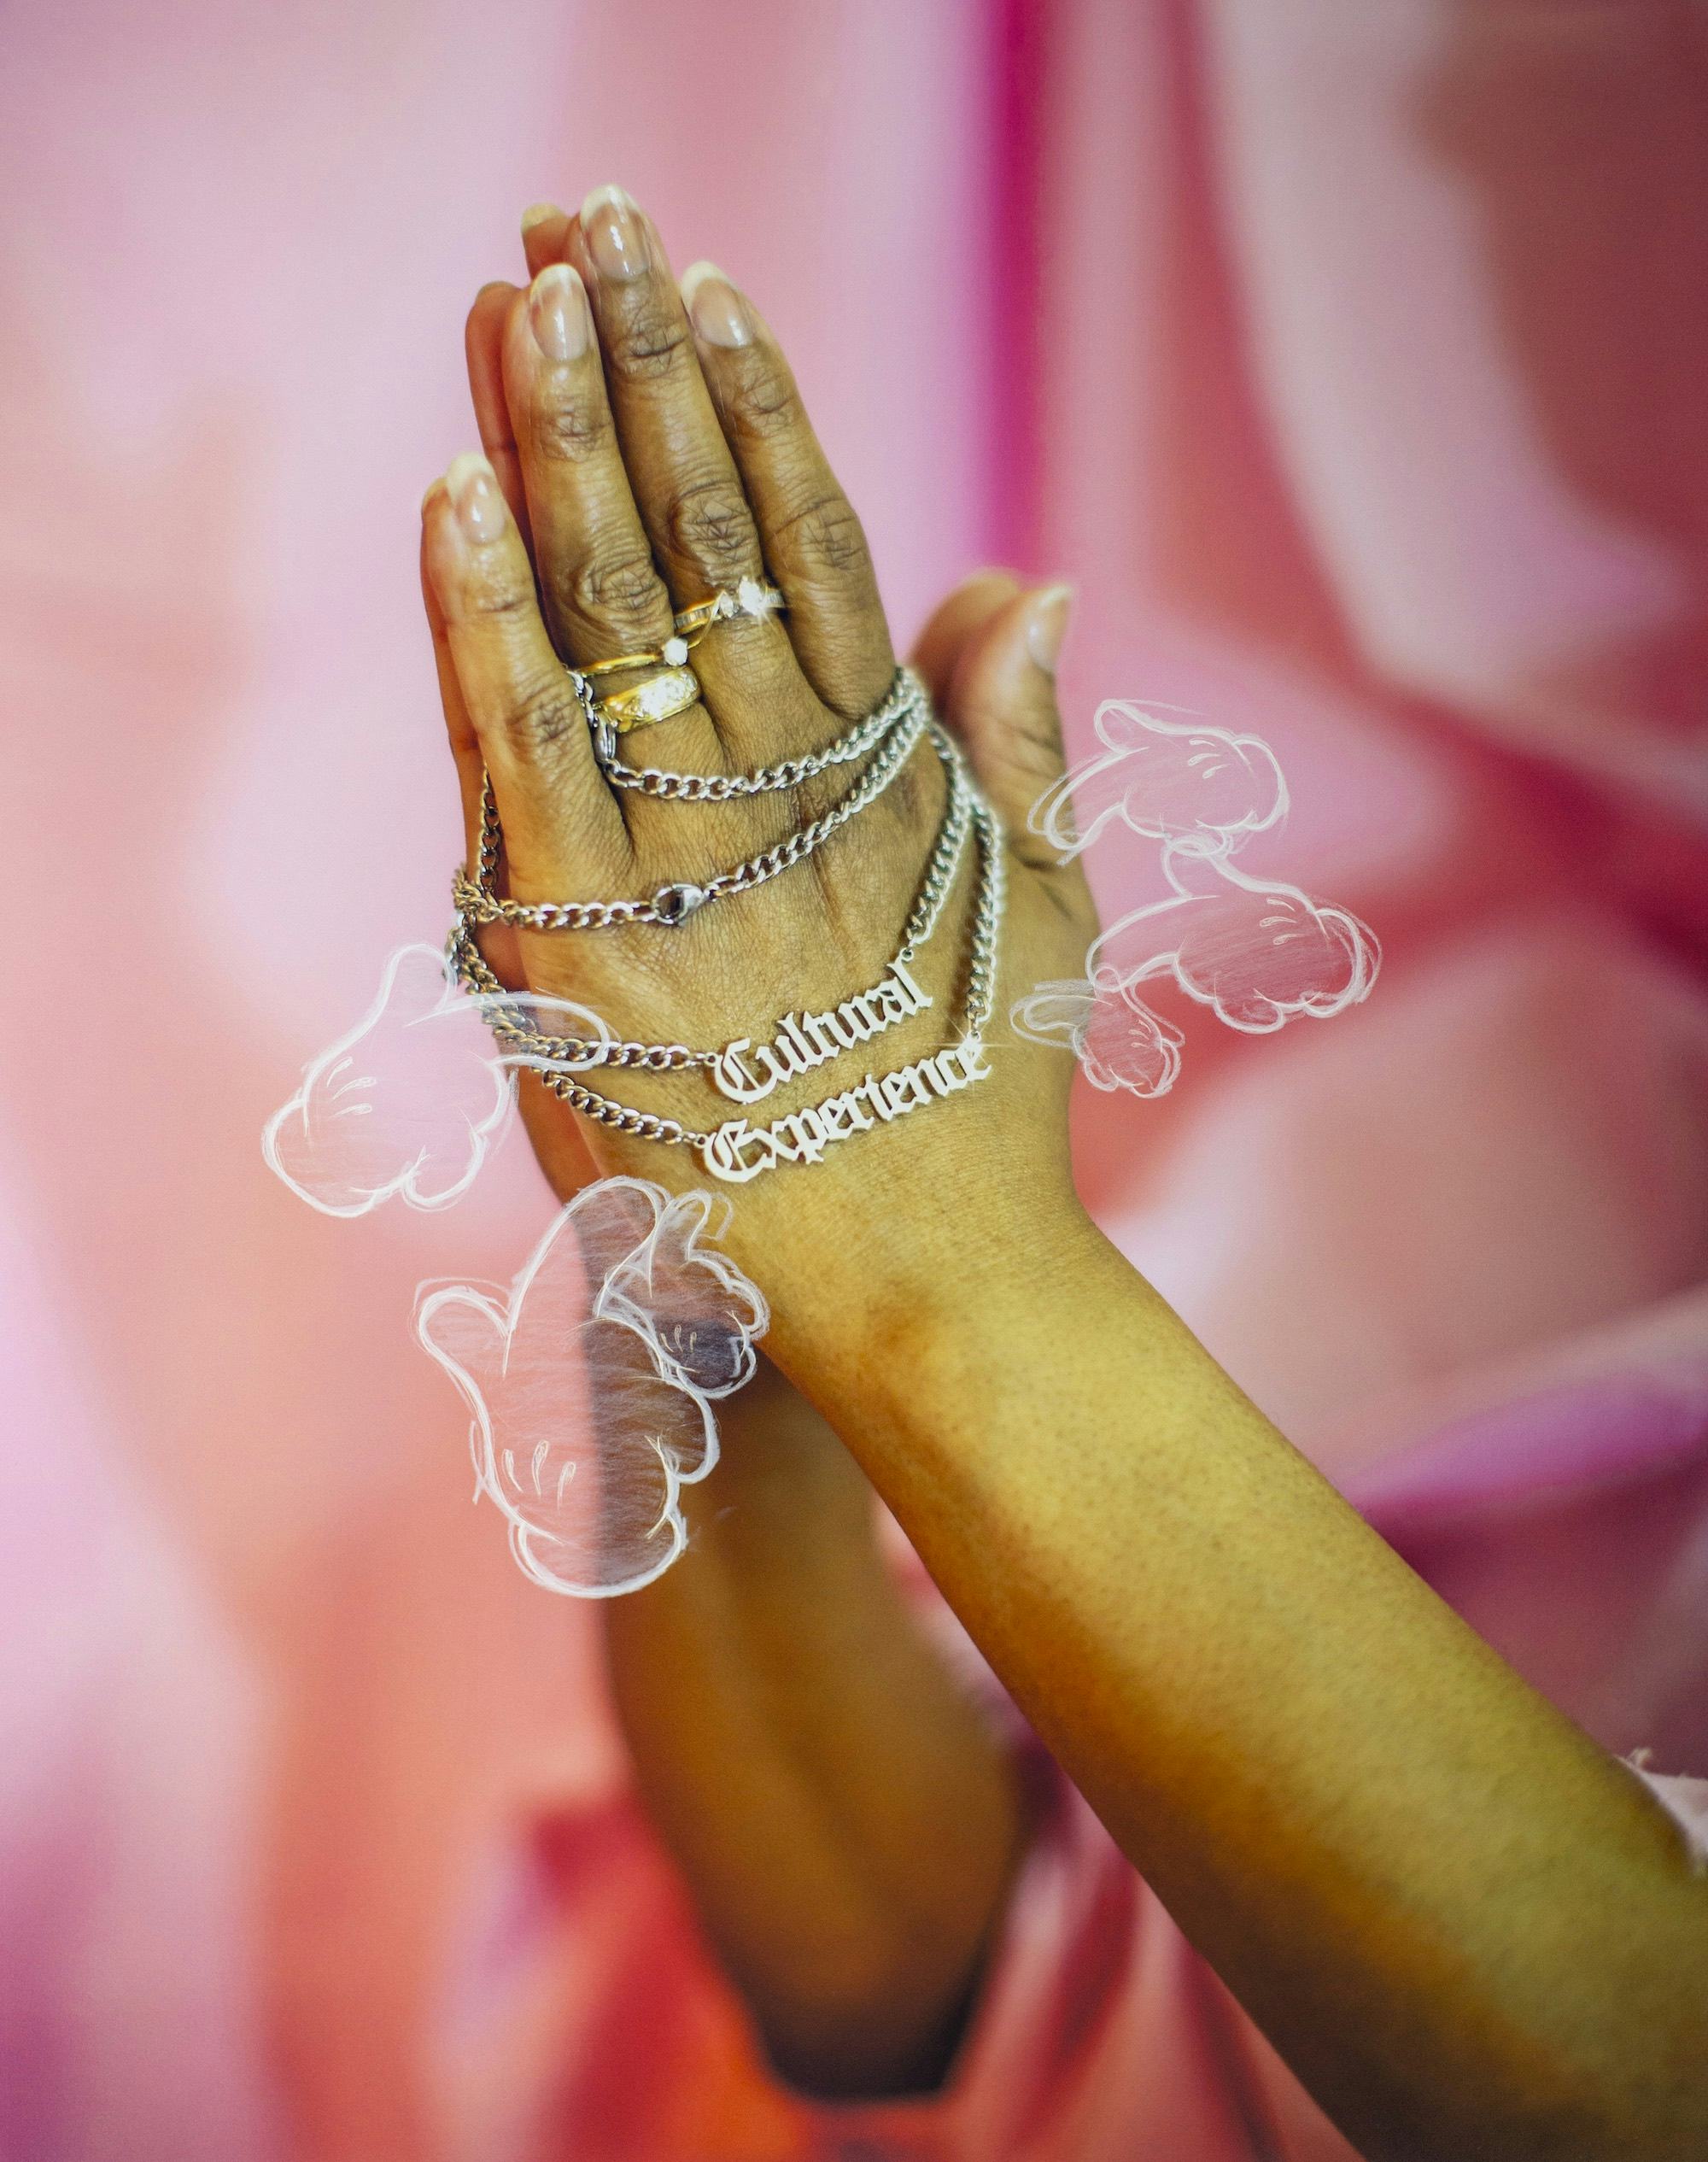 Photo of a pair of hands with rings in prayer gesture, holding a chain that spells 'Cultural Experience', in front of a pink silky background. © André Ramos-Woodard